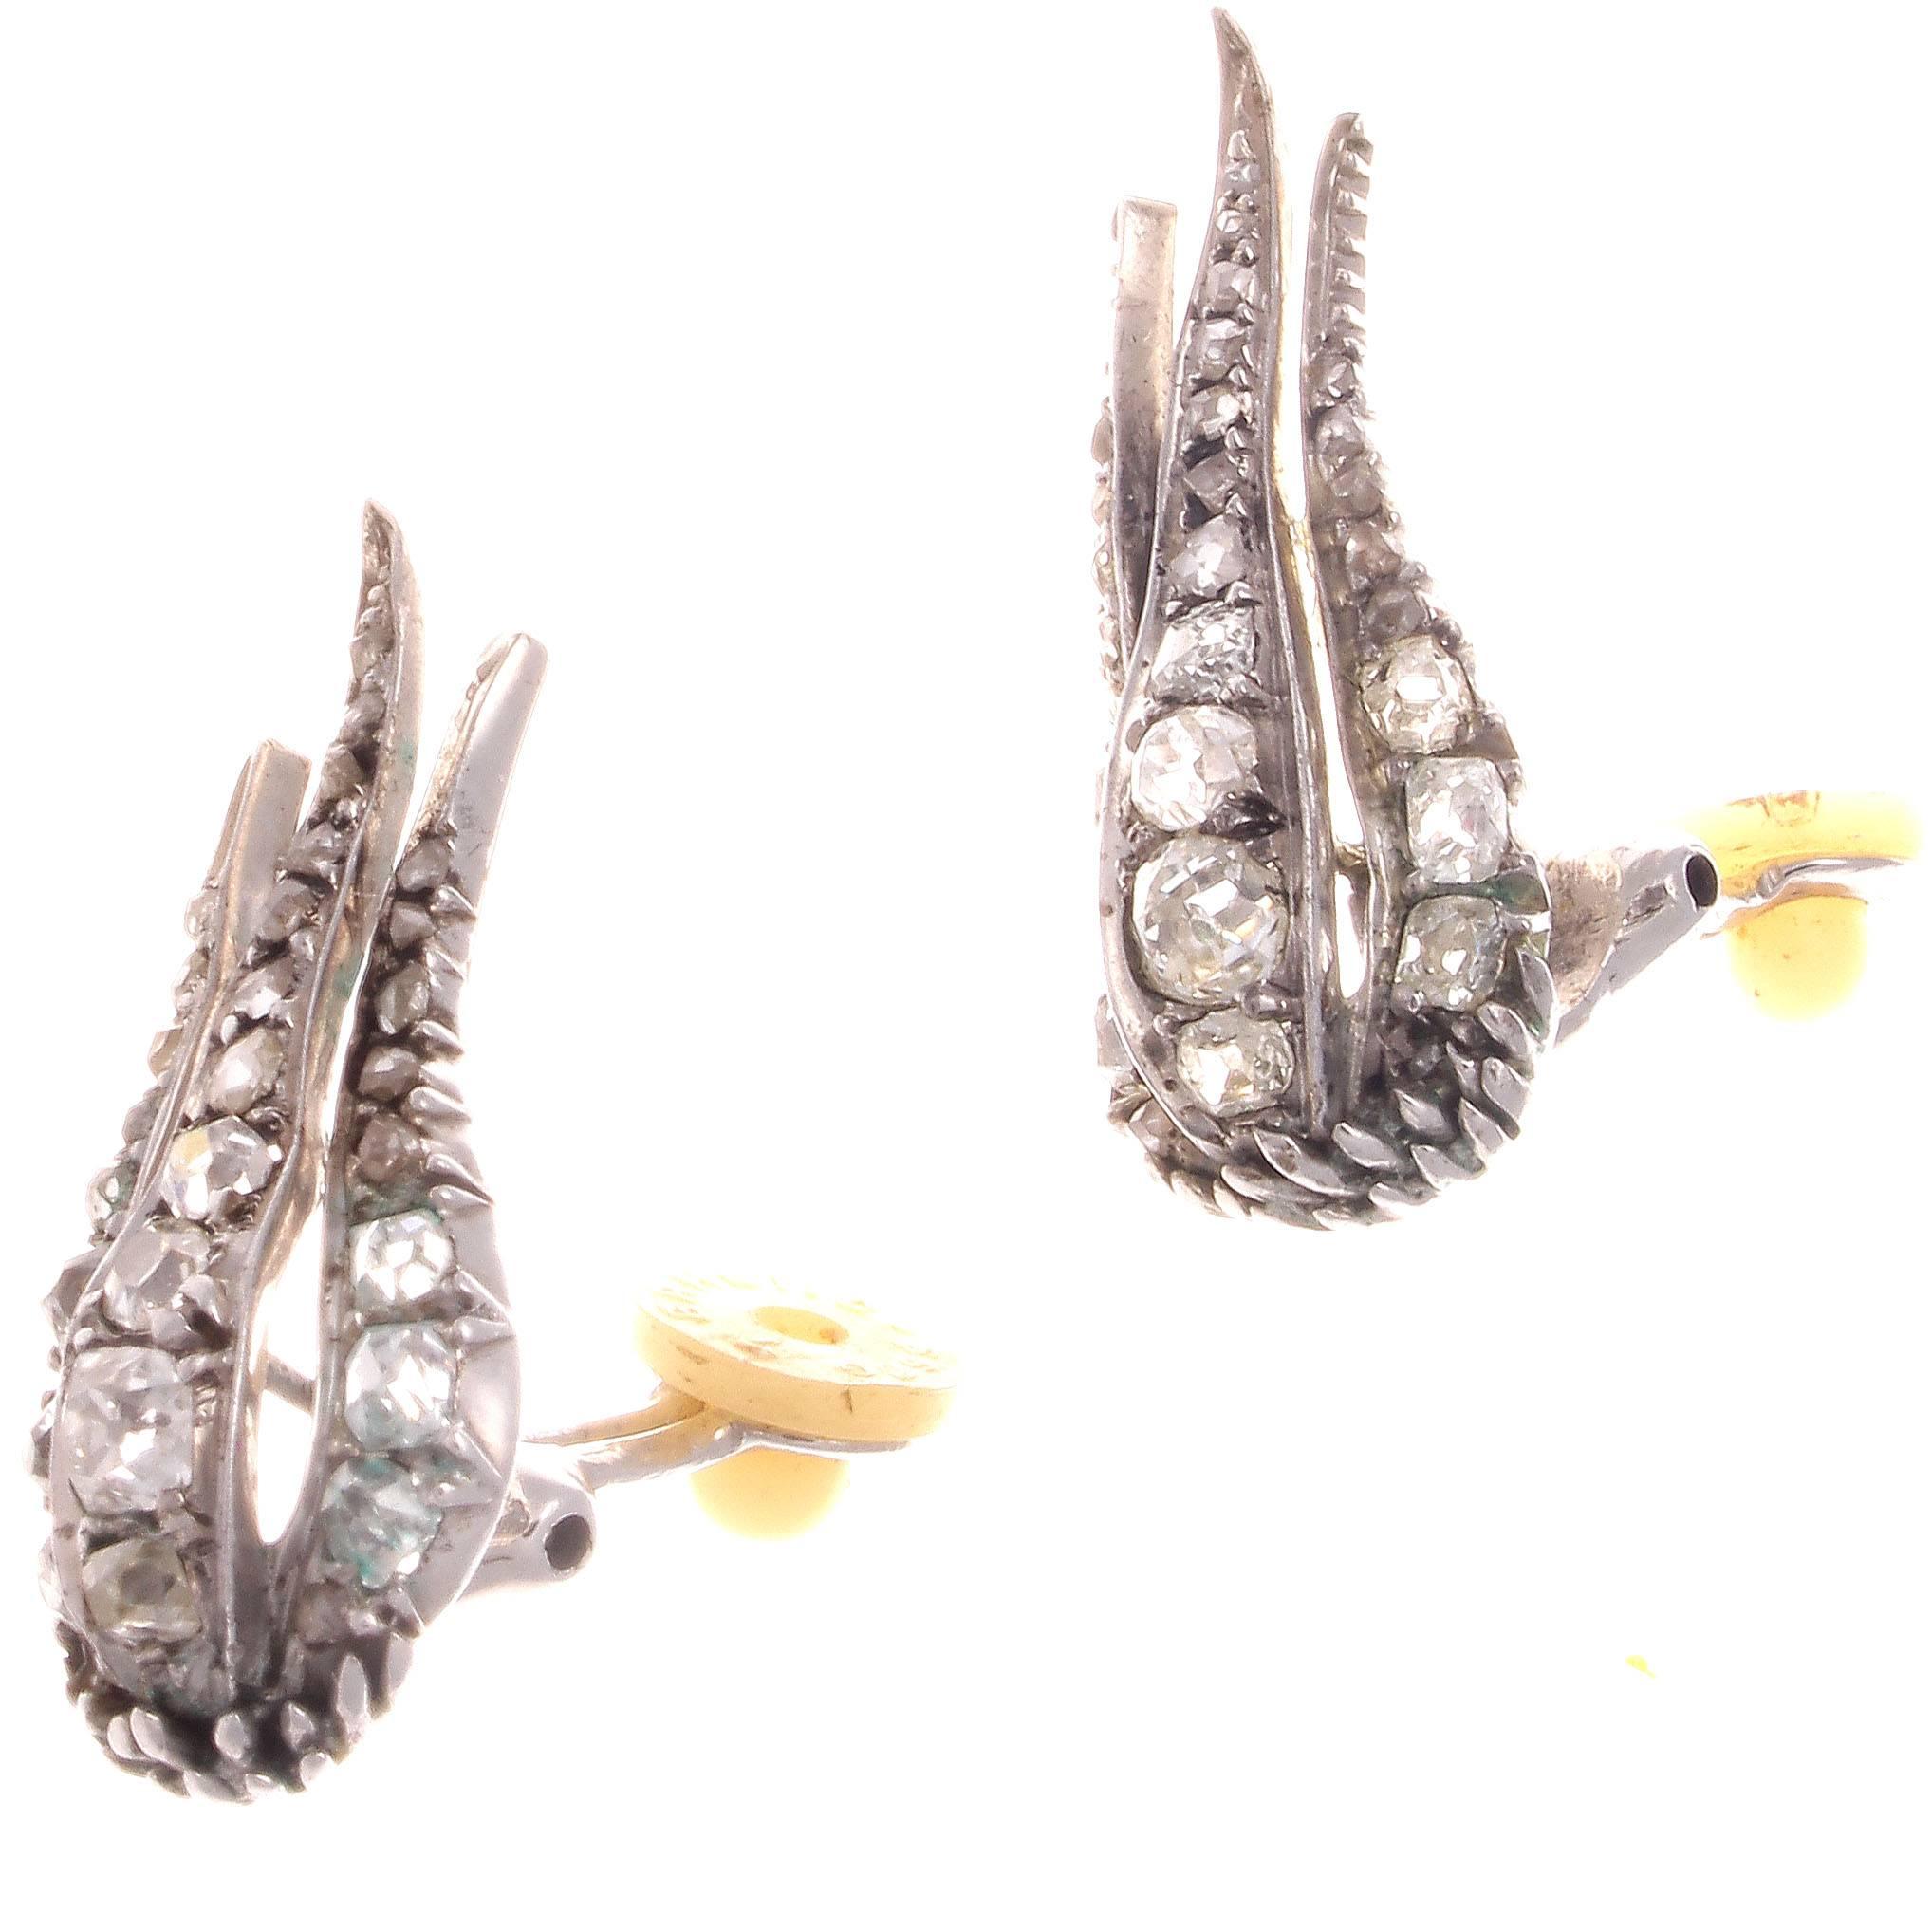 If you're in Paris at midnight these timeless Belle Époque earrings would be worthy accessories to any party you attend. Never knowing what artists or era you might run into these earrings will show your appreciation of the glorious past. Set with